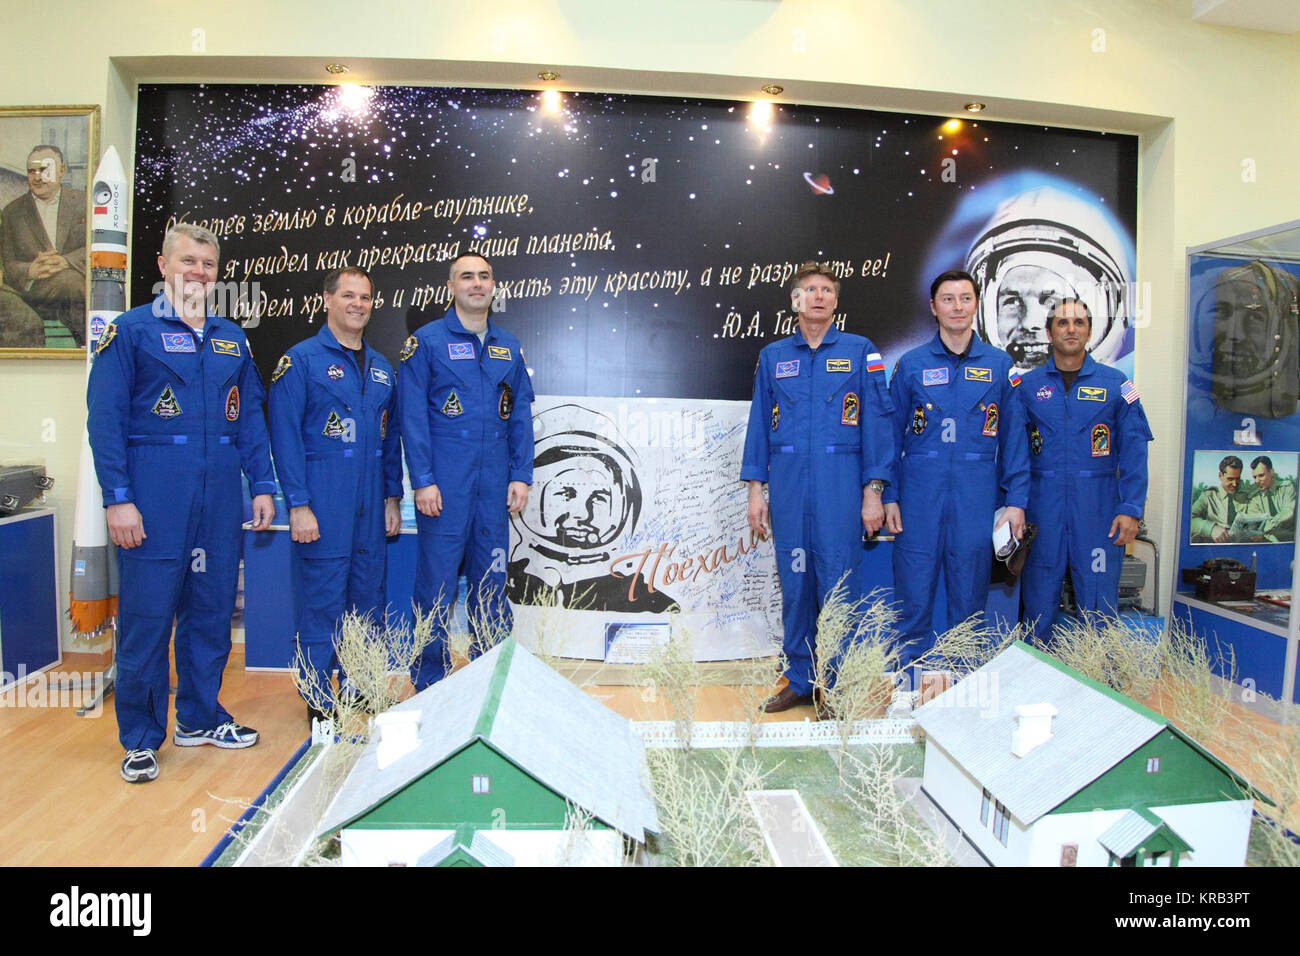 At the historic museum near the launch pad at the Baikonur Cosmodrome in Kazakhstan, the Expedition 31/32 backup and prime crews pose for pictures May 11, 2012 in front of the mural depicting the likeness of Yuri Gagarin, the first human to fly in space. The photo session took place as training for the launch of Soyuz Commander Gennady Padalka, Flight Engineer Joe Acaba of NASA and Flight Engineer Sergei Revin drew to a close for their liftoff May 15 in their Soyuz TMA-04 spacecraft to begin a four-month mission on the International Space Station. From left to right are backup crewmembers Oleg Stock Photo